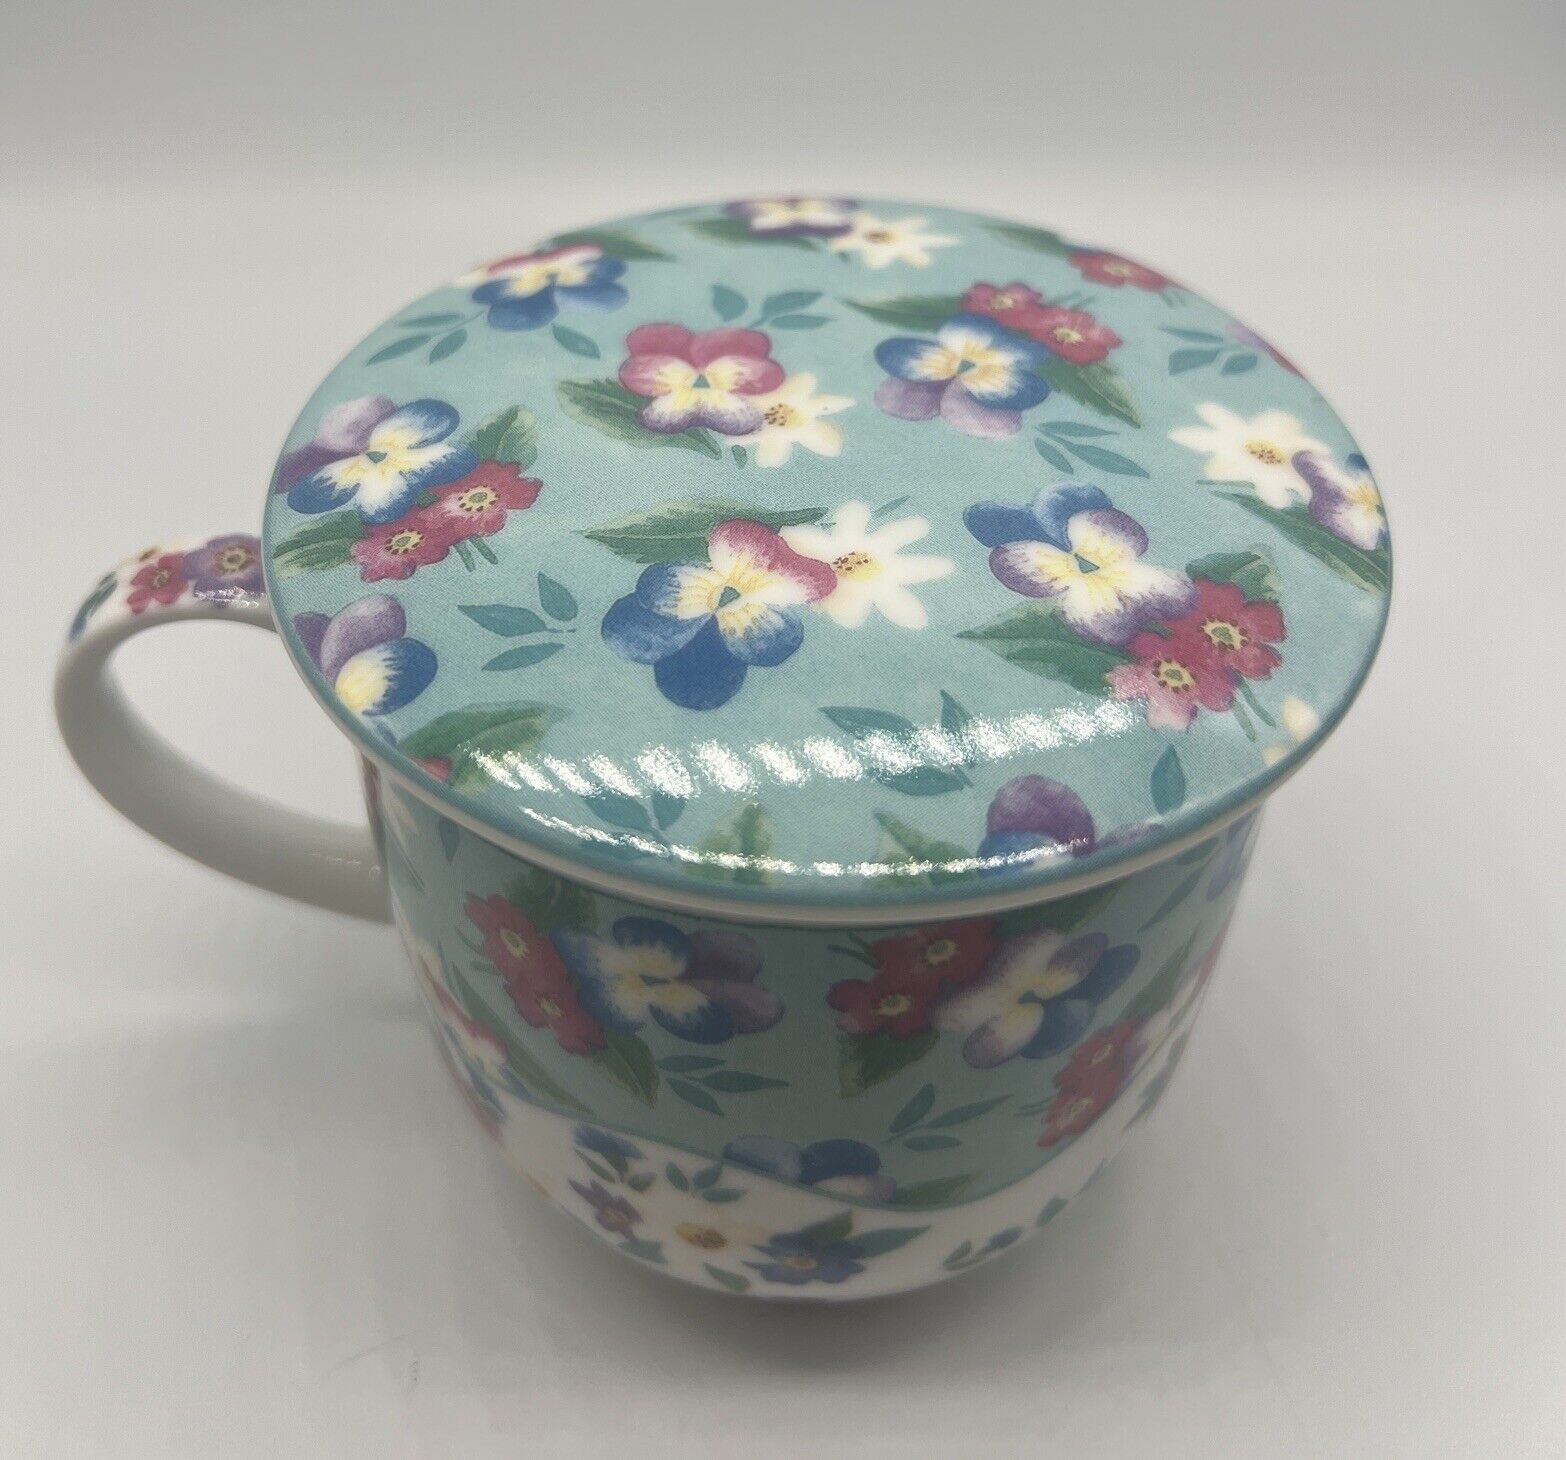 Andrea by Sadek CHINTZ CHARMING Teacup with Top Julia Bullmore